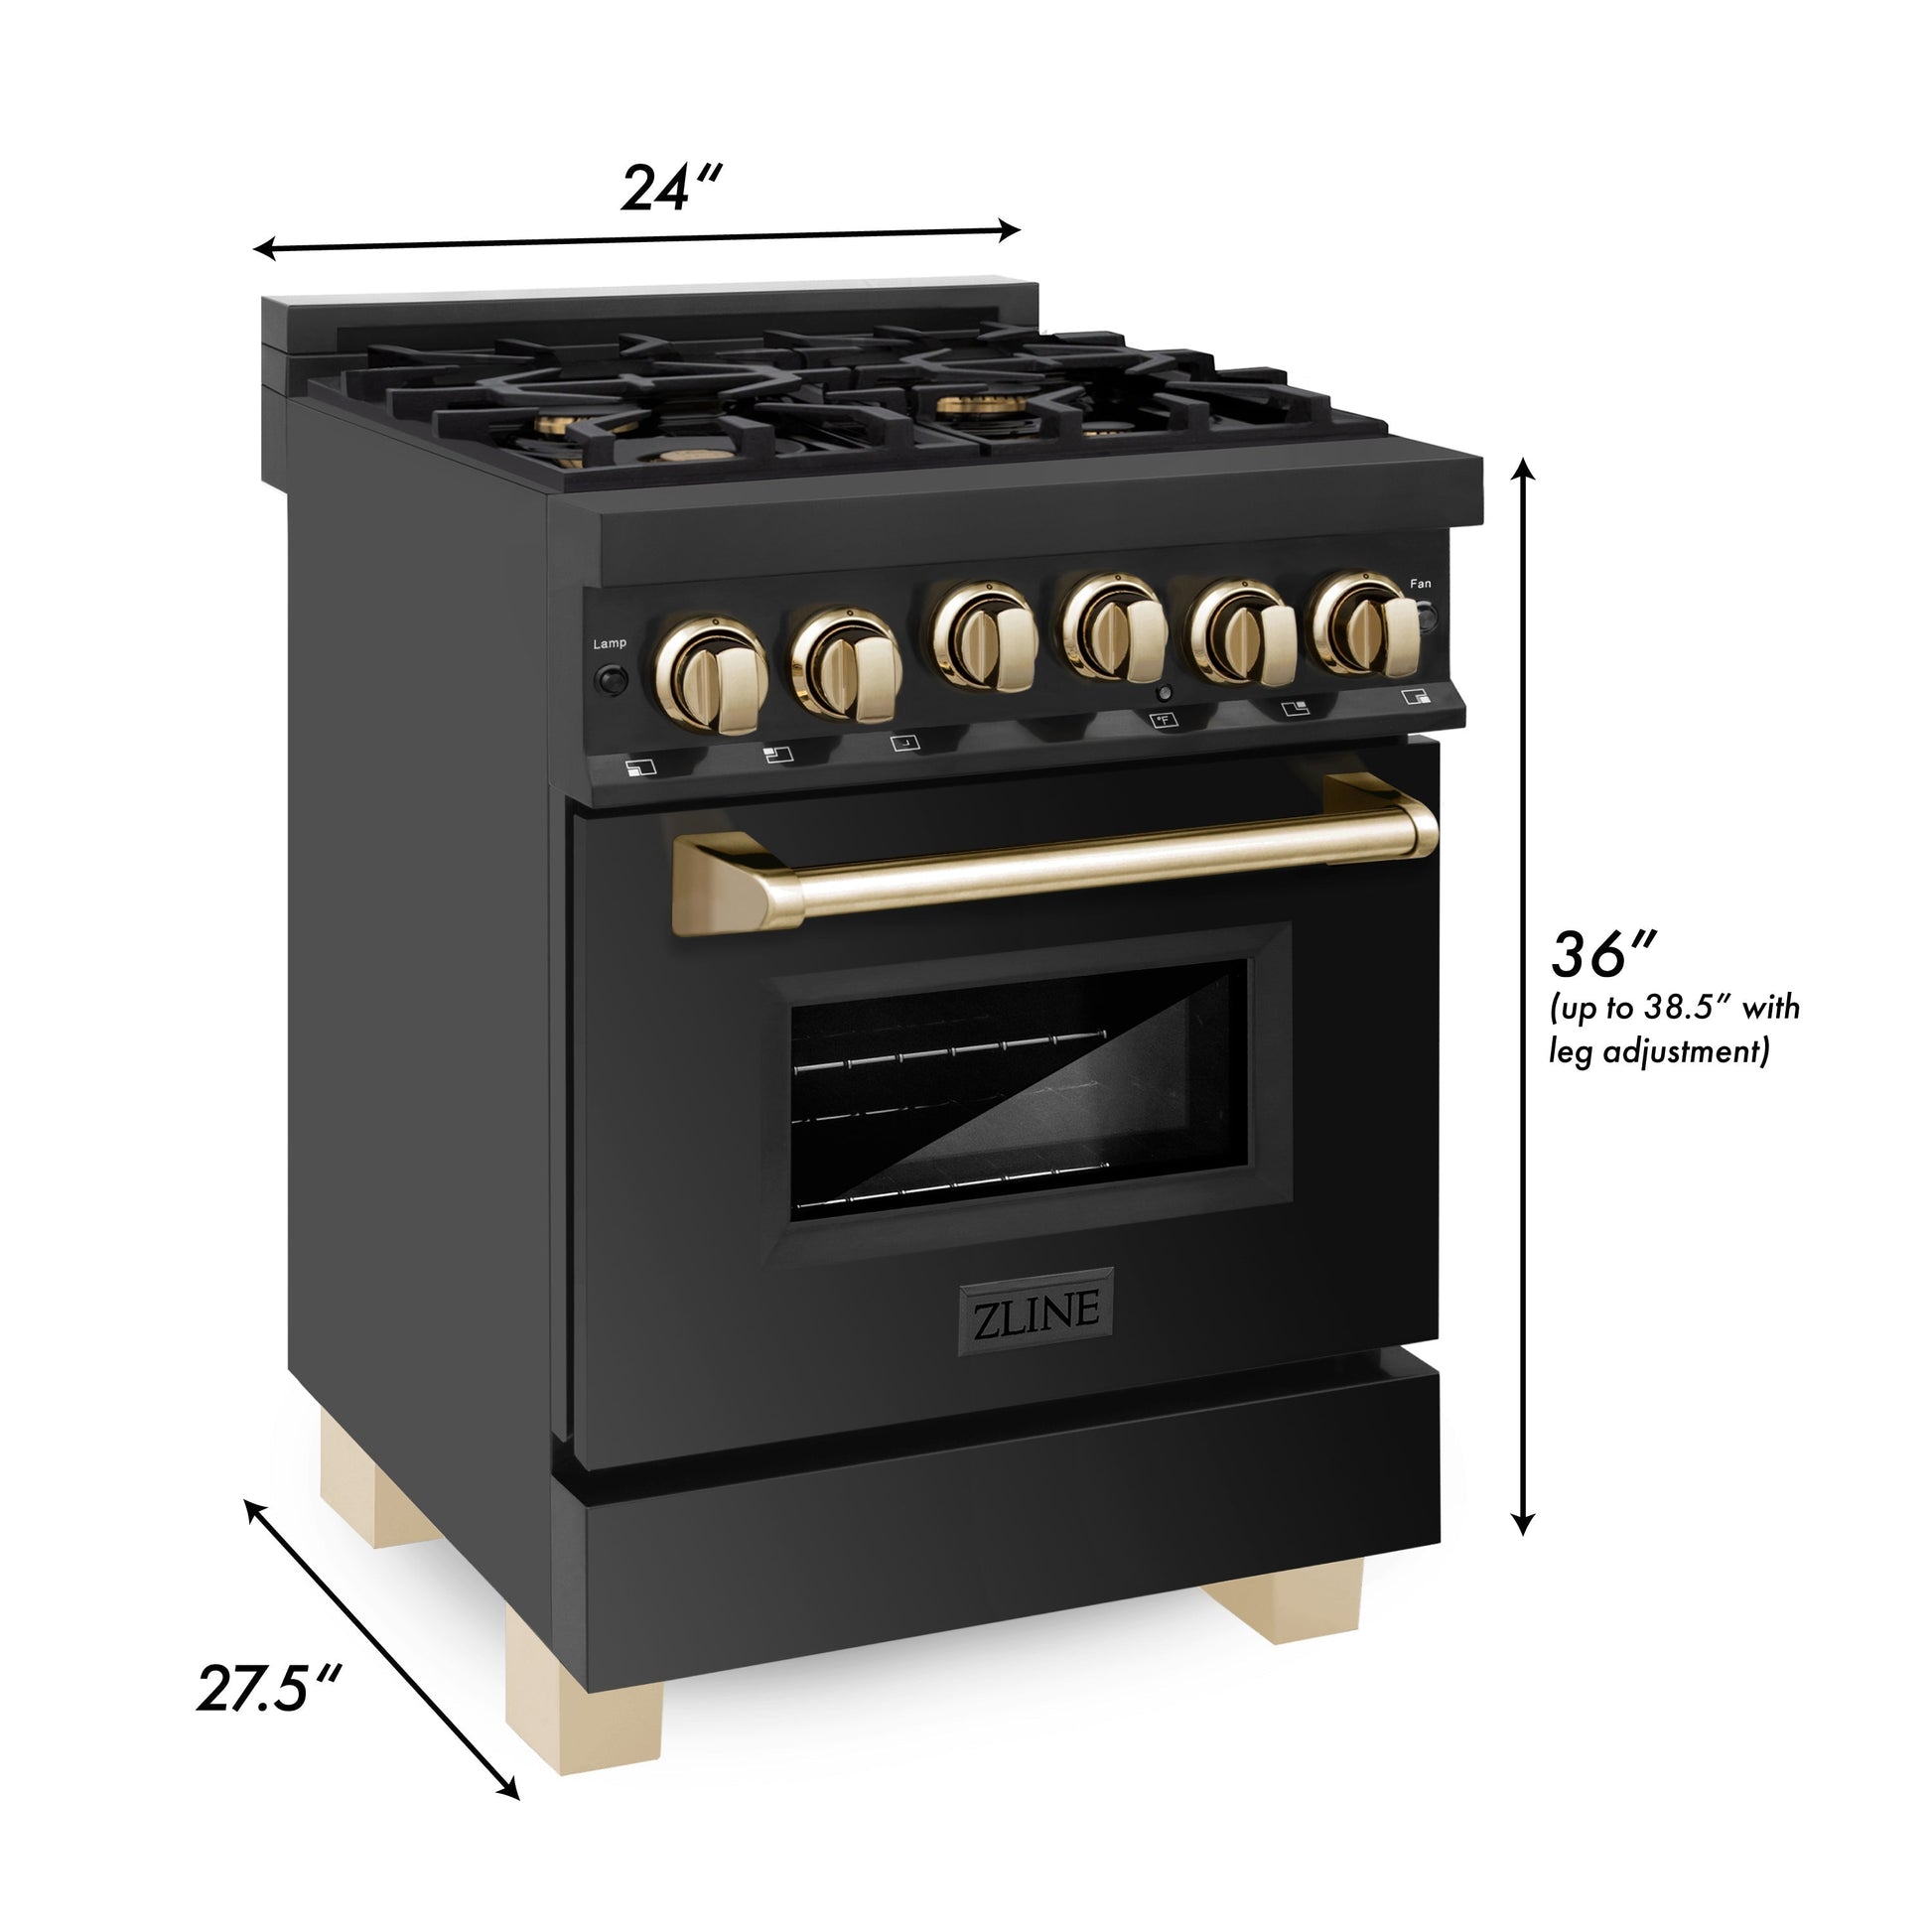 ZLINE Autograph Edition 24" Range with Gas Stove and Gas Oven - Black Stainless Steel with Accents